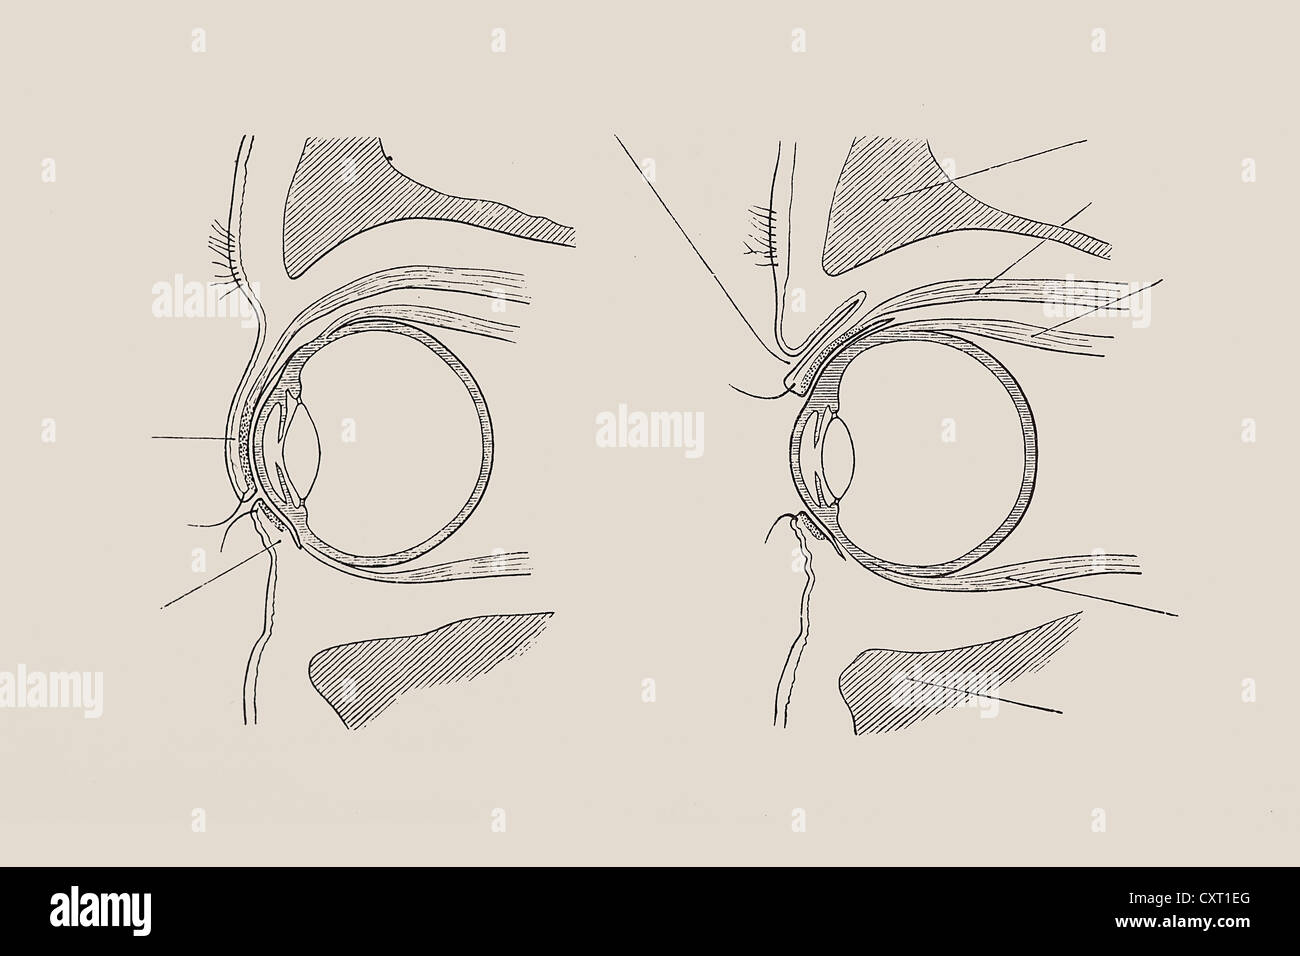 Cross-sectional view of the human eye, anatomical illustration Stock Photo